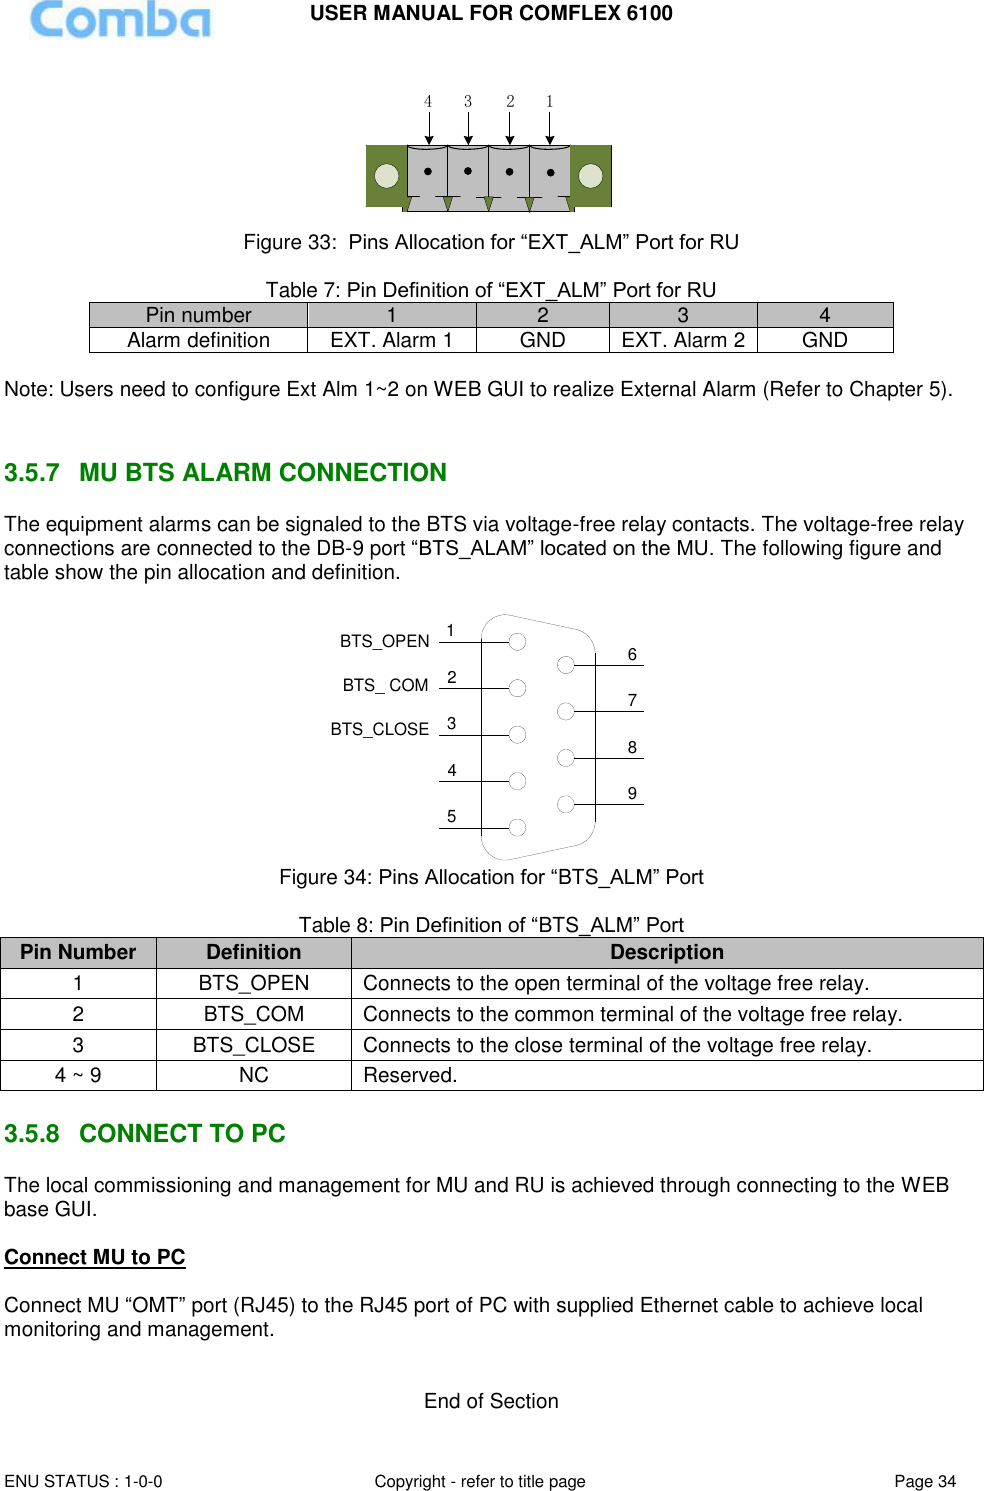 USER MANUAL FOR COMFLEX 6100  ENU STATUS : 1-0-0 Copyright - refer to title page Page 34     1234 Figure 33:  Pins Allocation for “EXT_ALM” Port for RU  Table 7: Pin Definition of “EXT_ALM” Port for RU Pin number 1 2 3 4 Alarm definition EXT. Alarm 1 GND EXT. Alarm 2 GND  Note: Users need to configure Ext Alm 1~2 on WEB GUI to realize External Alarm (Refer to Chapter 5).    3.5.7  MU BTS ALARM CONNECTION The equipment alarms can be signaled to the BTS via voltage-free relay contacts. The voltage-free relay connections are connected to the DB-9 port “BTS_ALAM” located on the MU. The following figure and table show the pin allocation and definition.    124356798BTS_OPENBTS_CLOSEBTS_ COM Figure 34: Pins Allocation for “BTS_ALM” Port  Table 8: Pin Definition of “BTS_ALM” Port Pin Number Definition Description 1 BTS_OPEN Connects to the open terminal of the voltage free relay. 2 BTS_COM  Connects to the common terminal of the voltage free relay. 3 BTS_CLOSE Connects to the close terminal of the voltage free relay. 4 ~ 9 NC Reserved.  3.5.8  CONNECT TO PC The local commissioning and management for MU and RU is achieved through connecting to the WEB base GUI.  Connect MU to PC  Connect MU “OMT” port (RJ45) to the RJ45 port of PC with supplied Ethernet cable to achieve local monitoring and management.    End of Section 